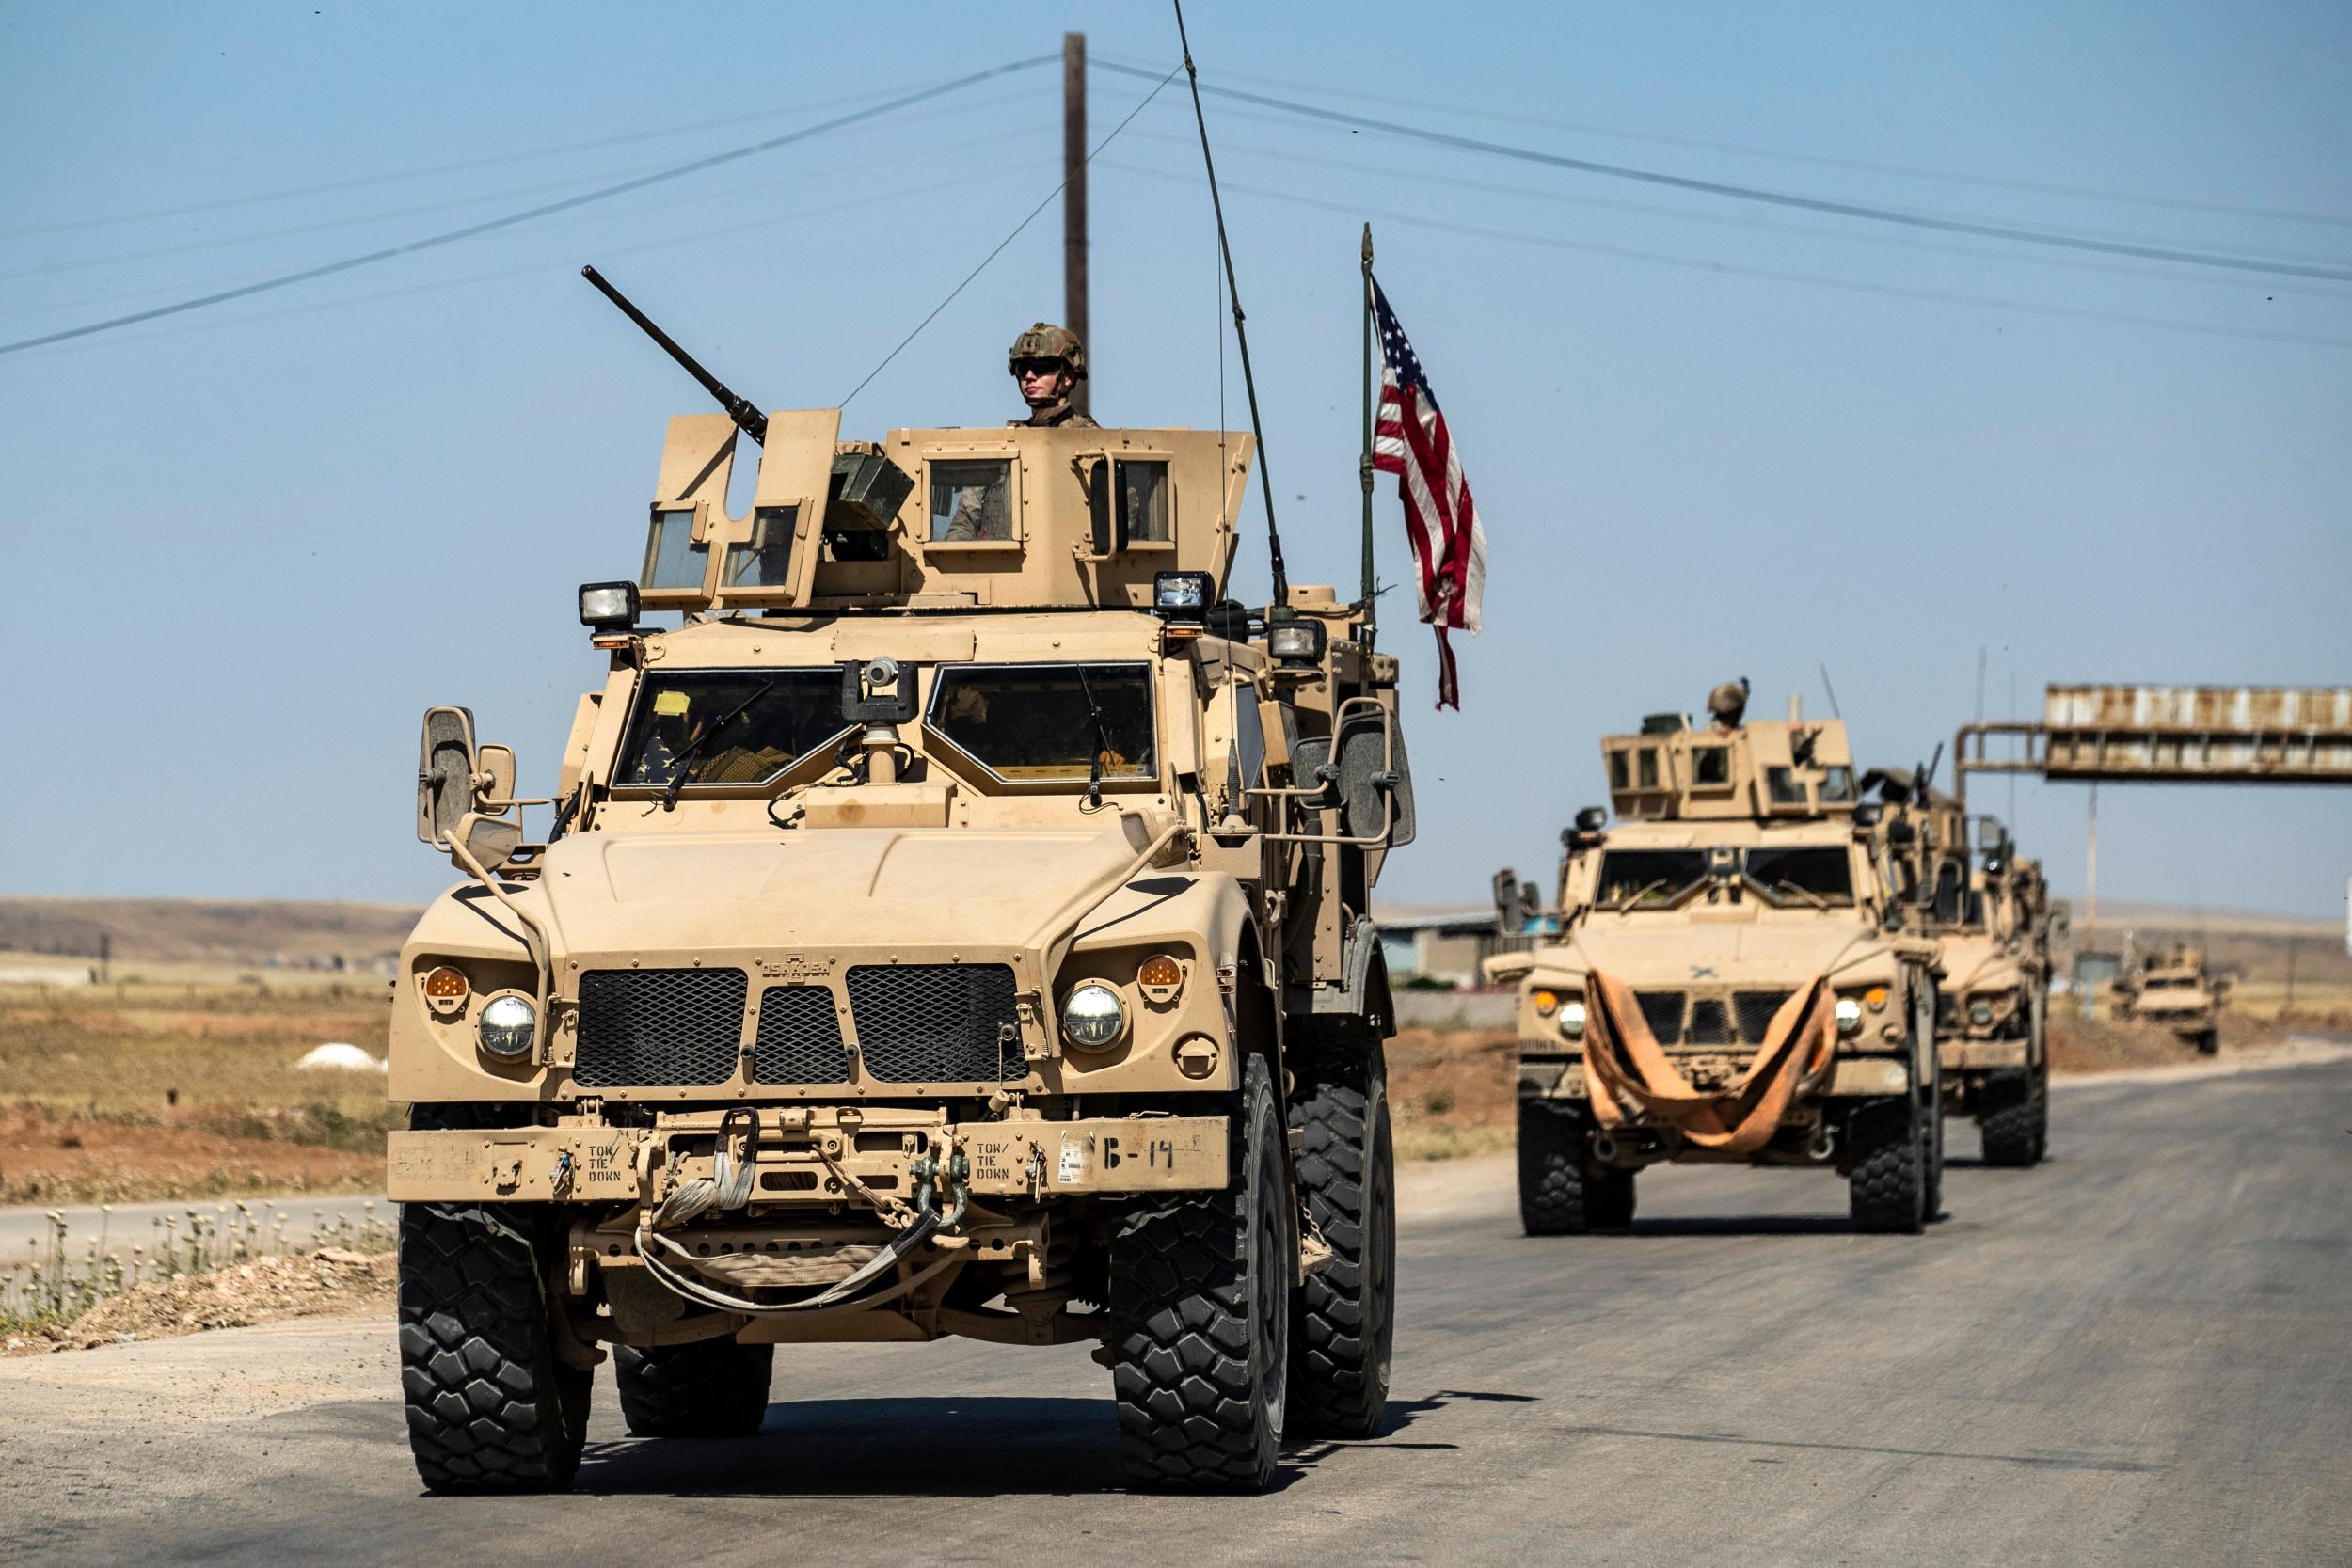 US military trucks like these, seen in Syria, have been outfitted for local law enforcement.